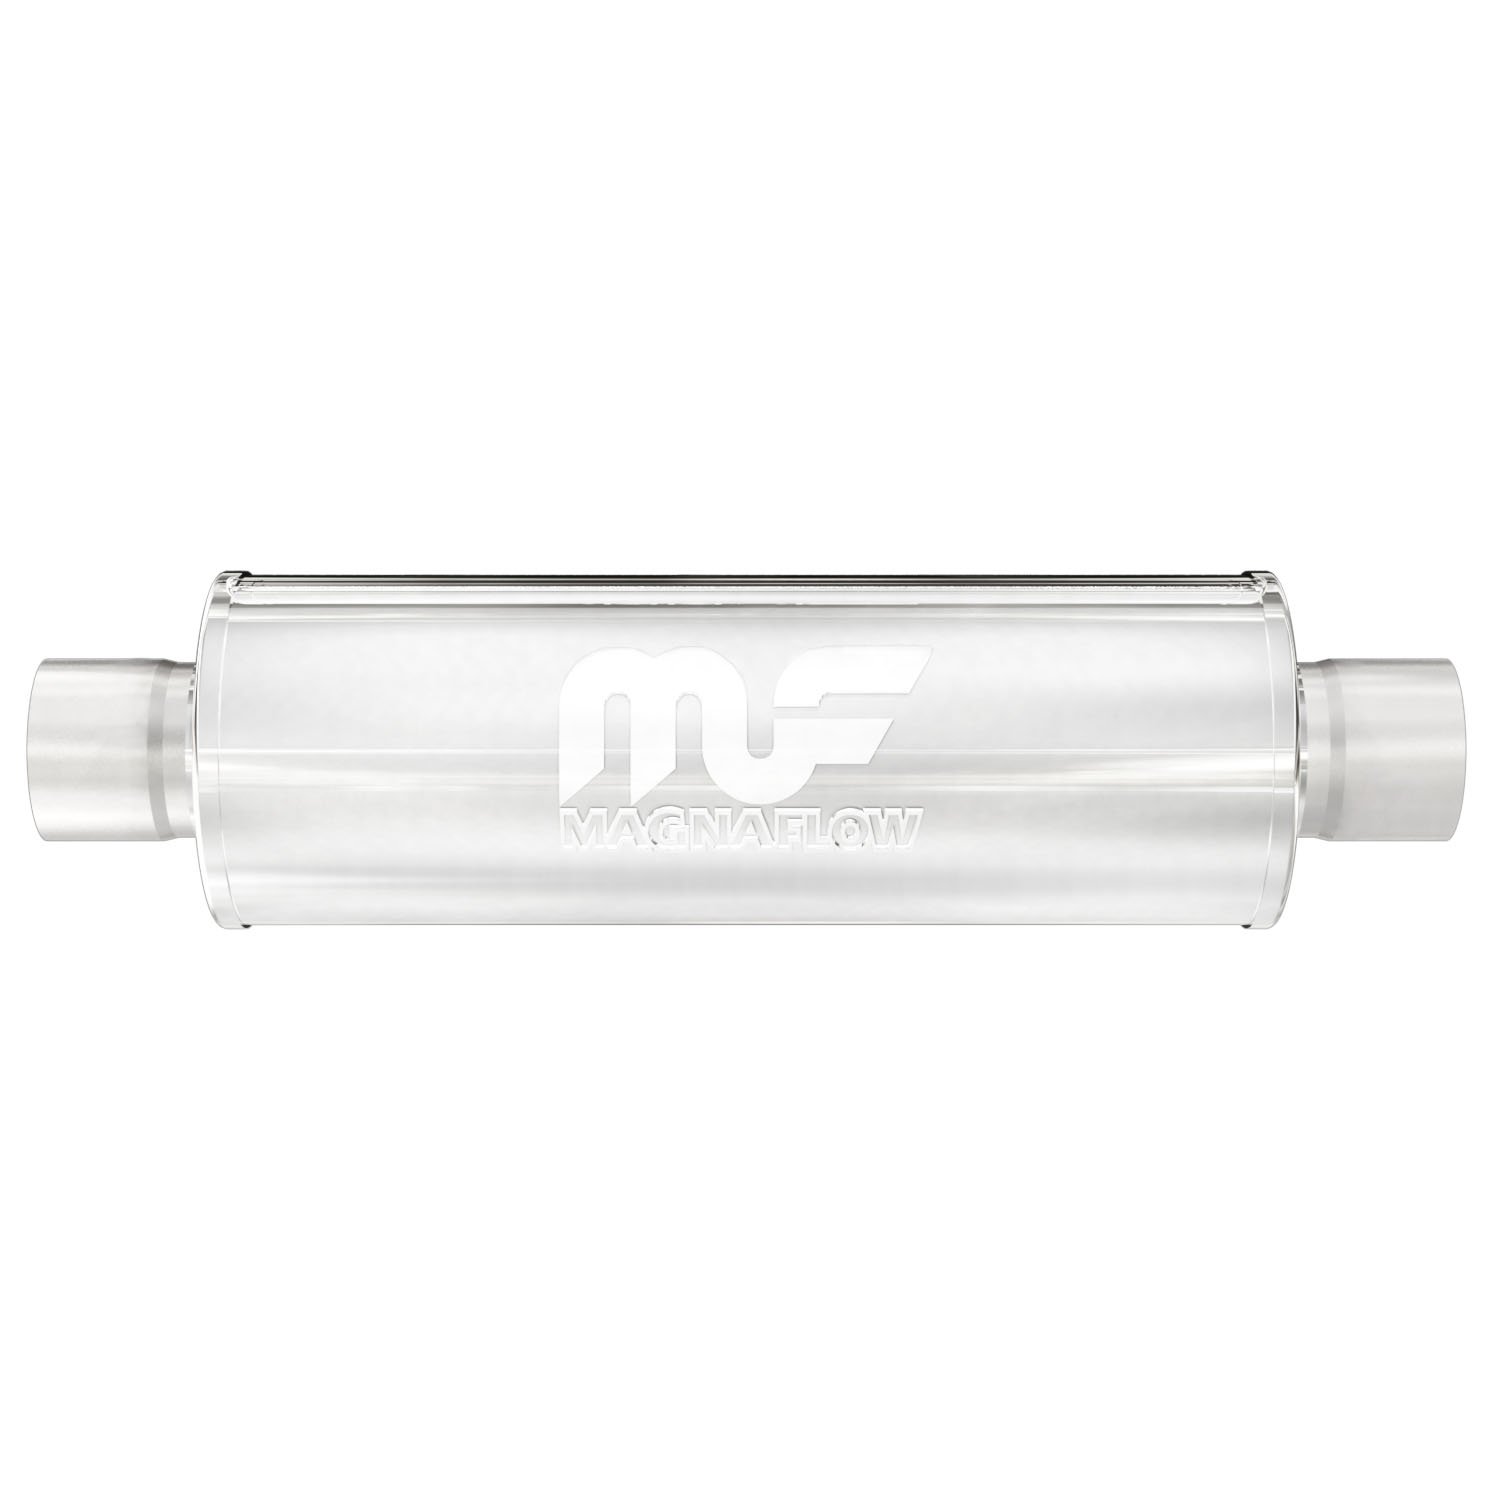 4" Round Muffler Center In/Center Out: 3" Body Length: 14" Overall Length: 20" Core Size: 2.5" Polished Finish